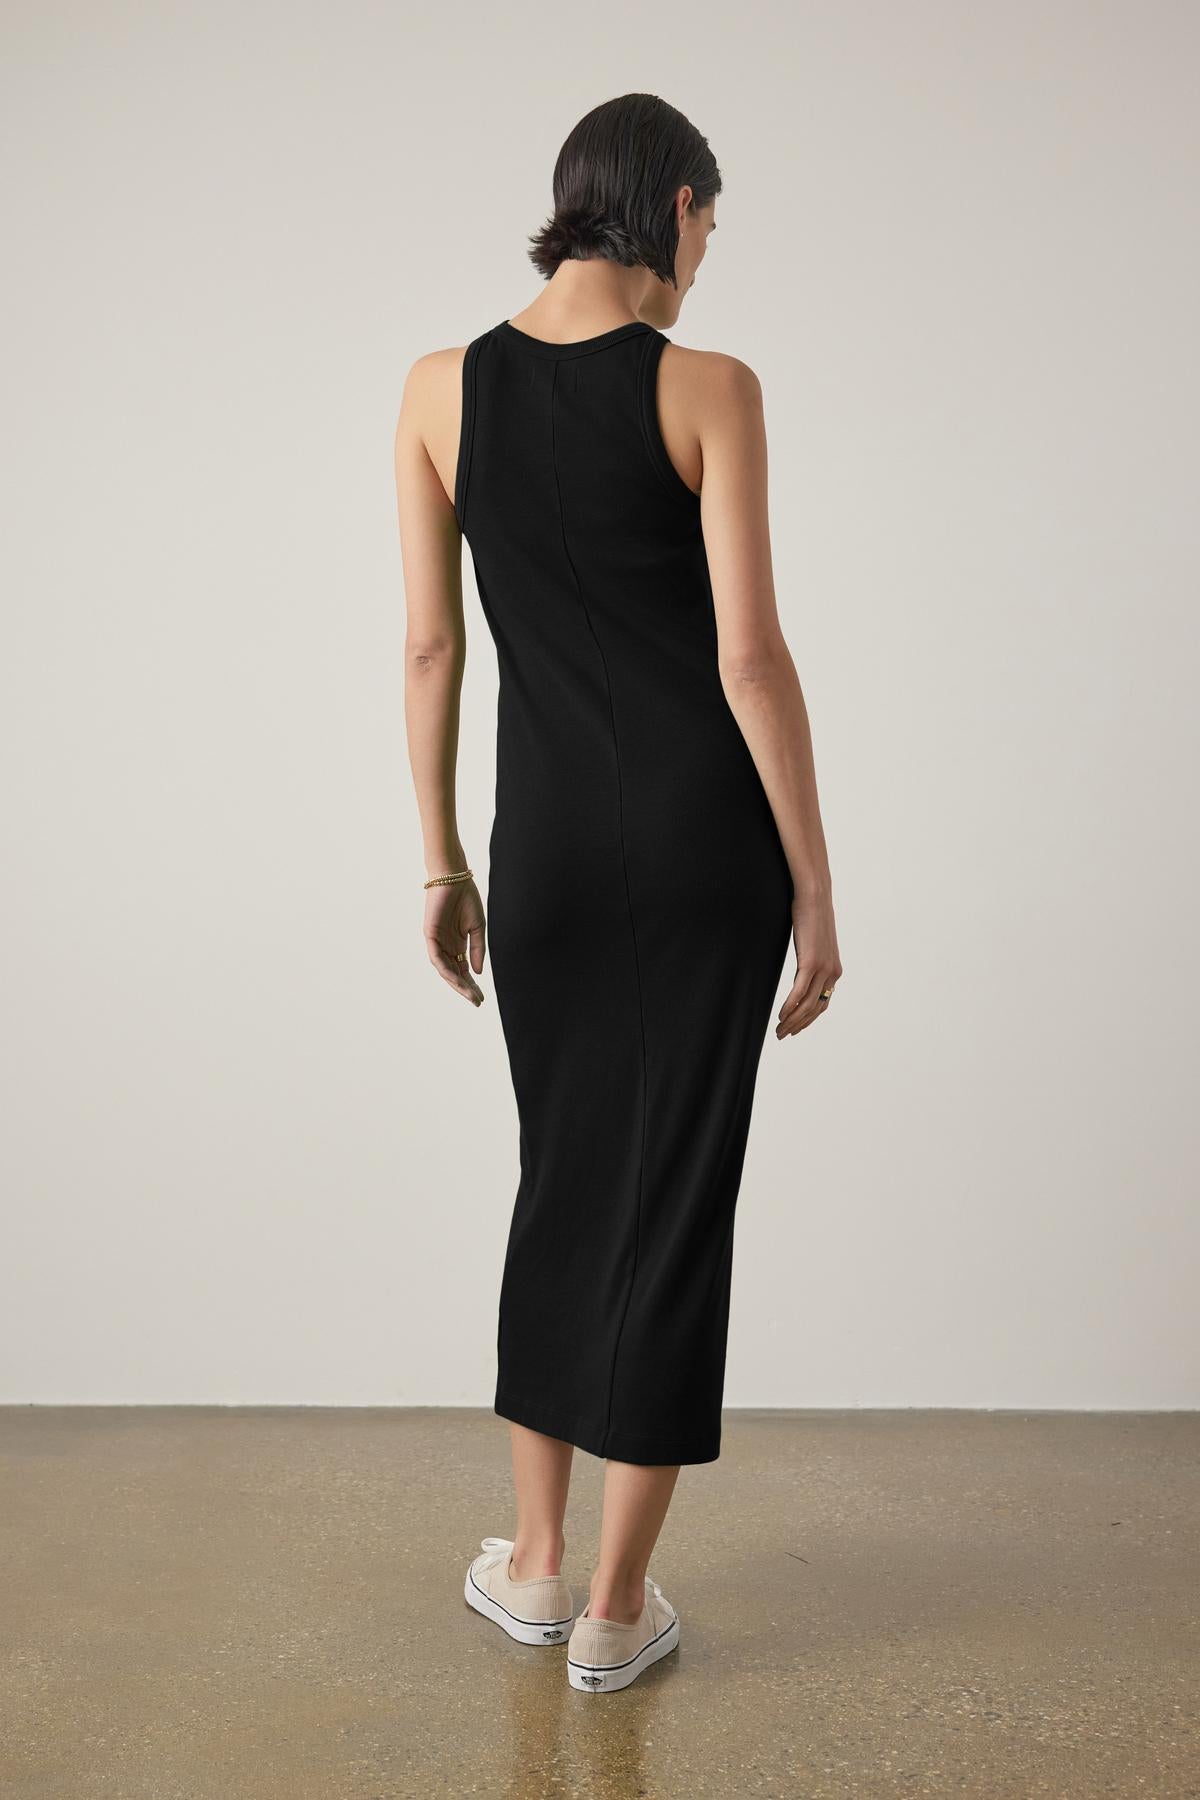 A woman in a sleek black sleeveless GRIFFITH DRESS from Velvet by Jenny Graham with a ribbed texture, seen from the back, paired with white sneakers, standing in a simple room with a concrete floor.-36891634368705